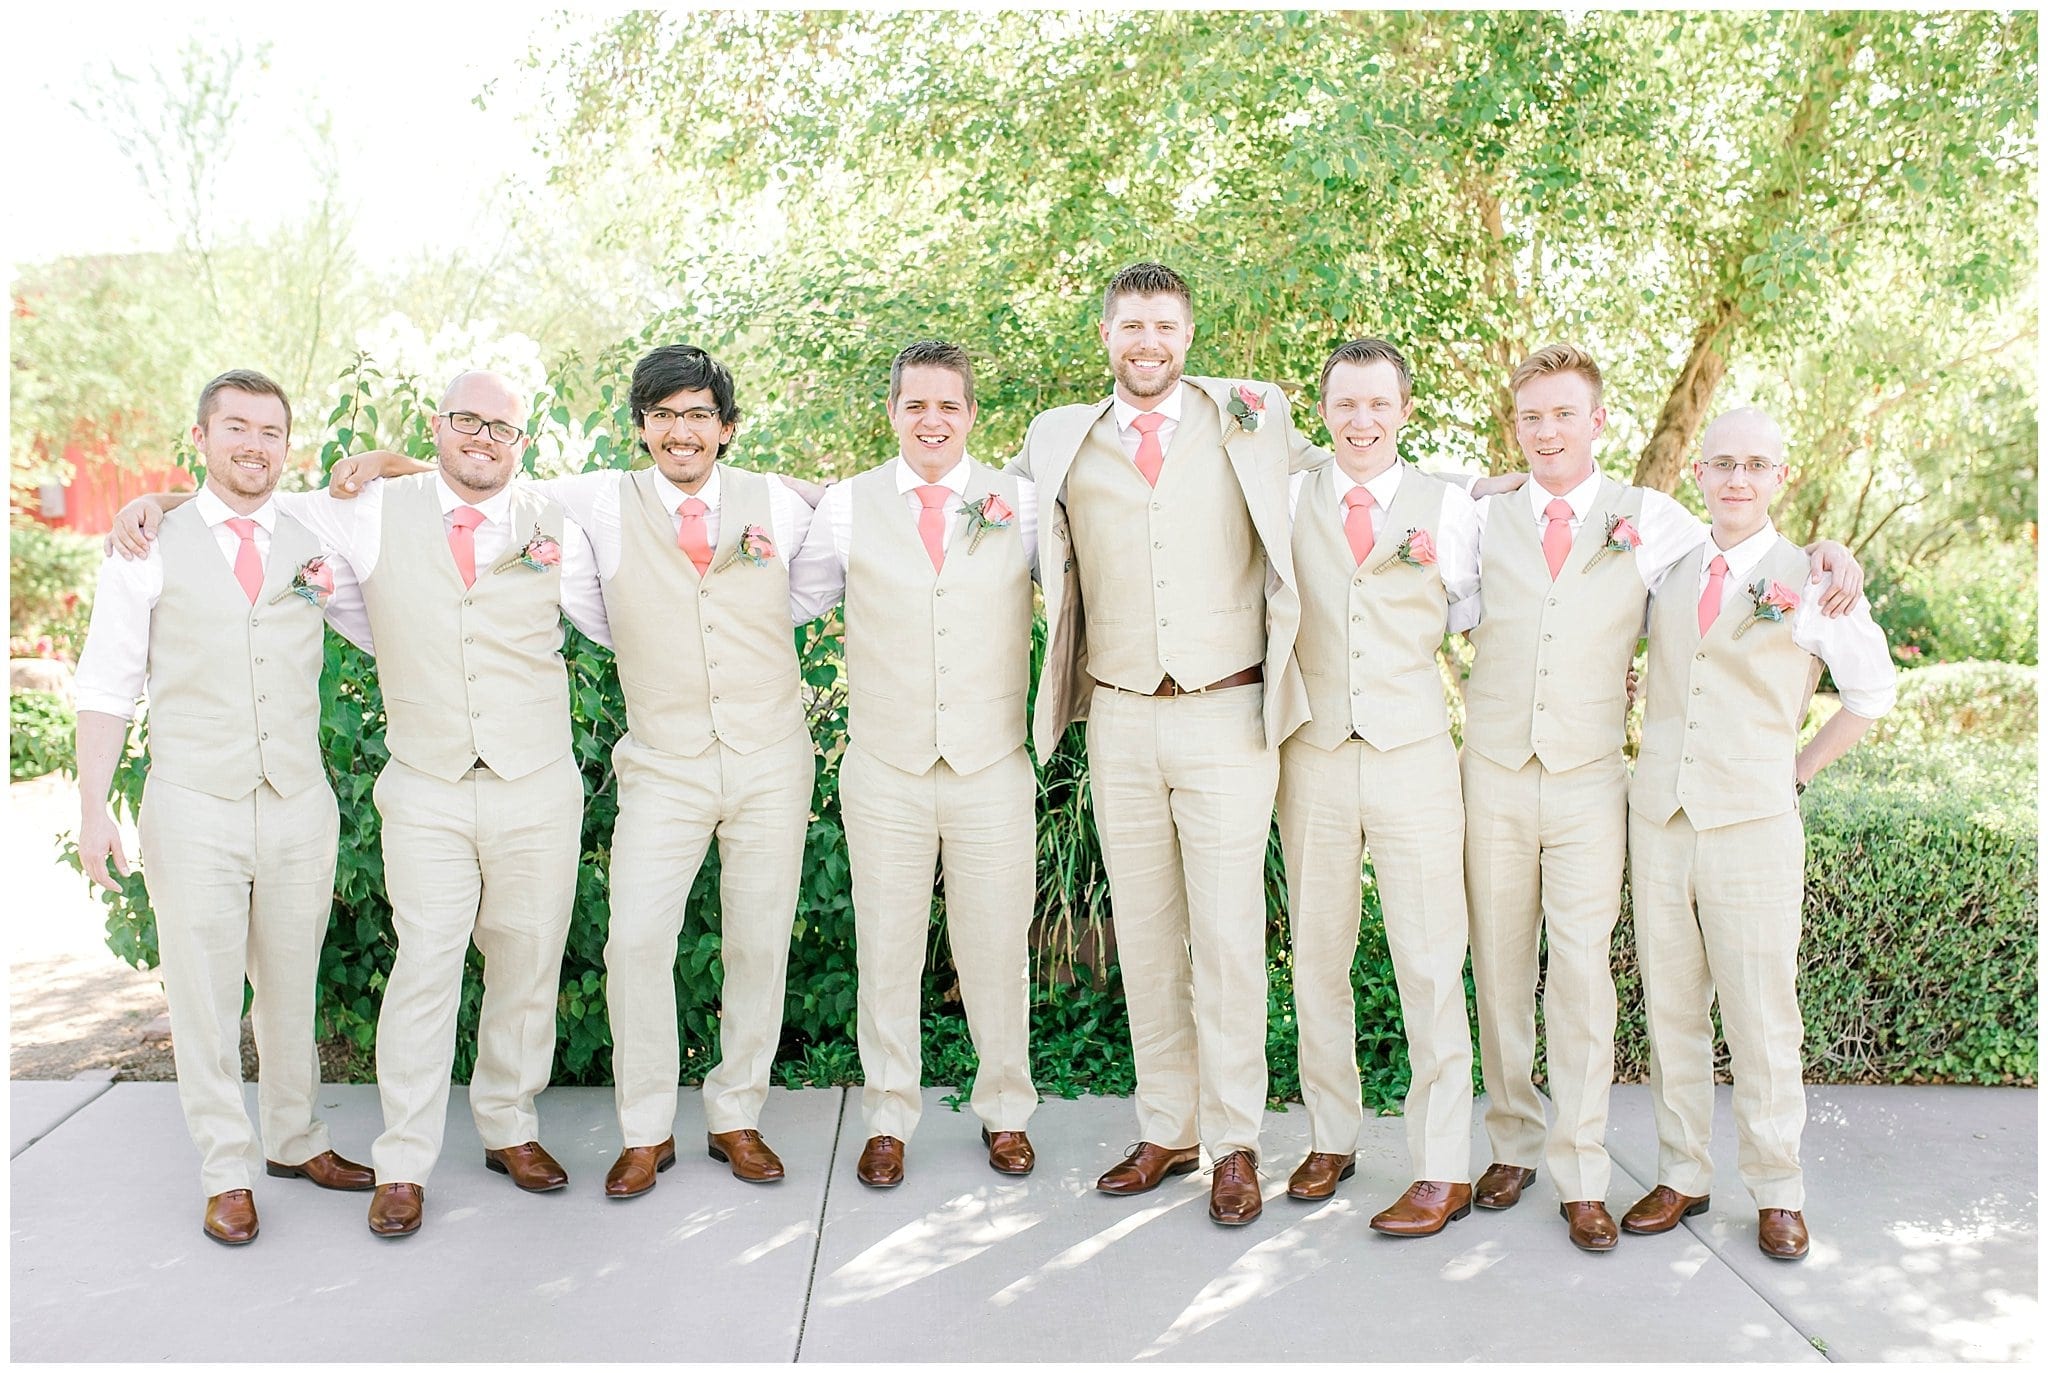 Groomsmen Pictures, windmill winery, tan suits, brown shoes